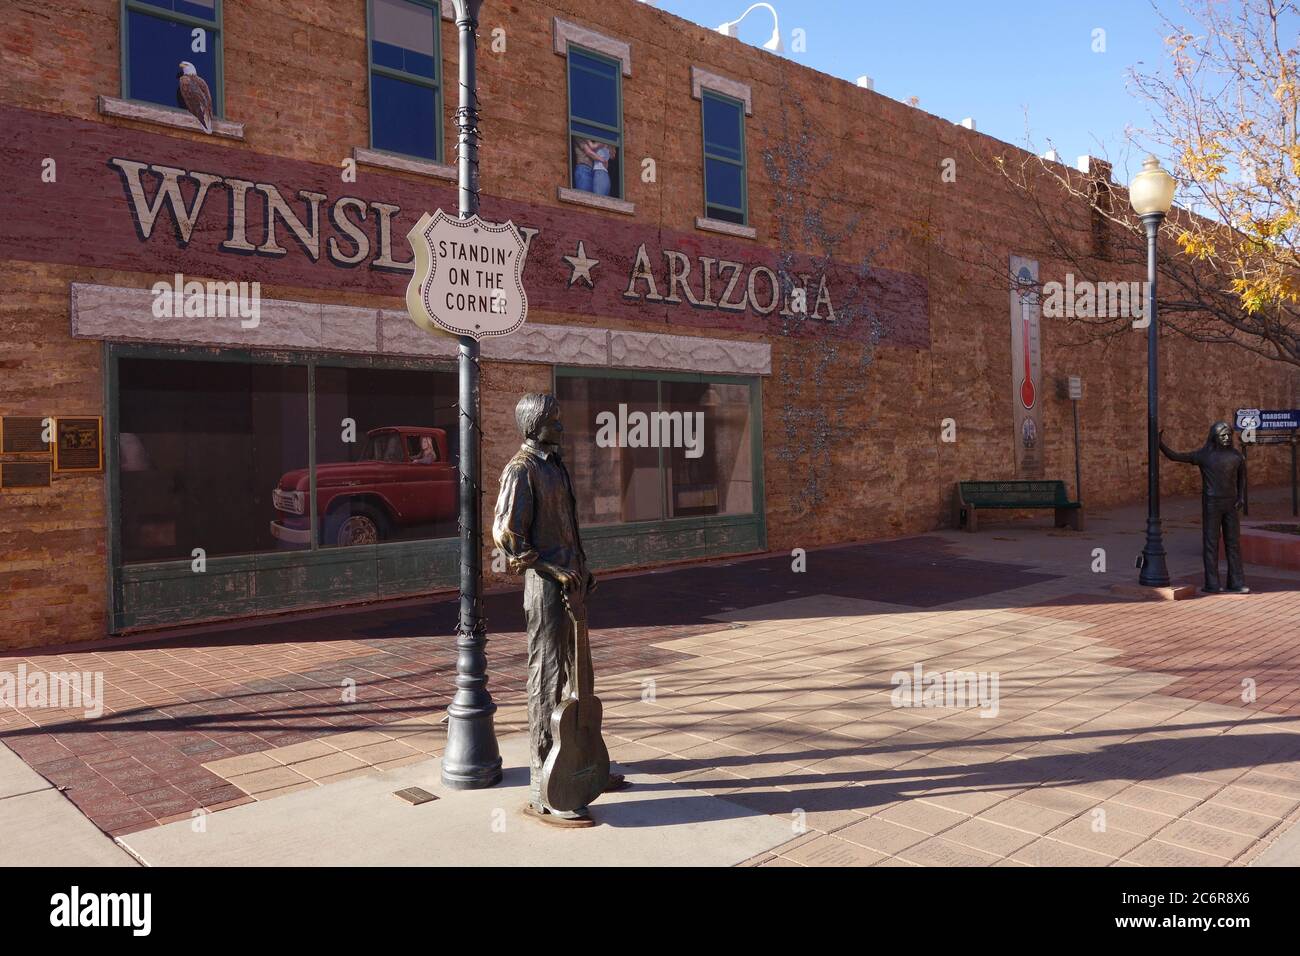 Standing on the Corner Park in Winslow, Arizona along Route 66 Stock Photo